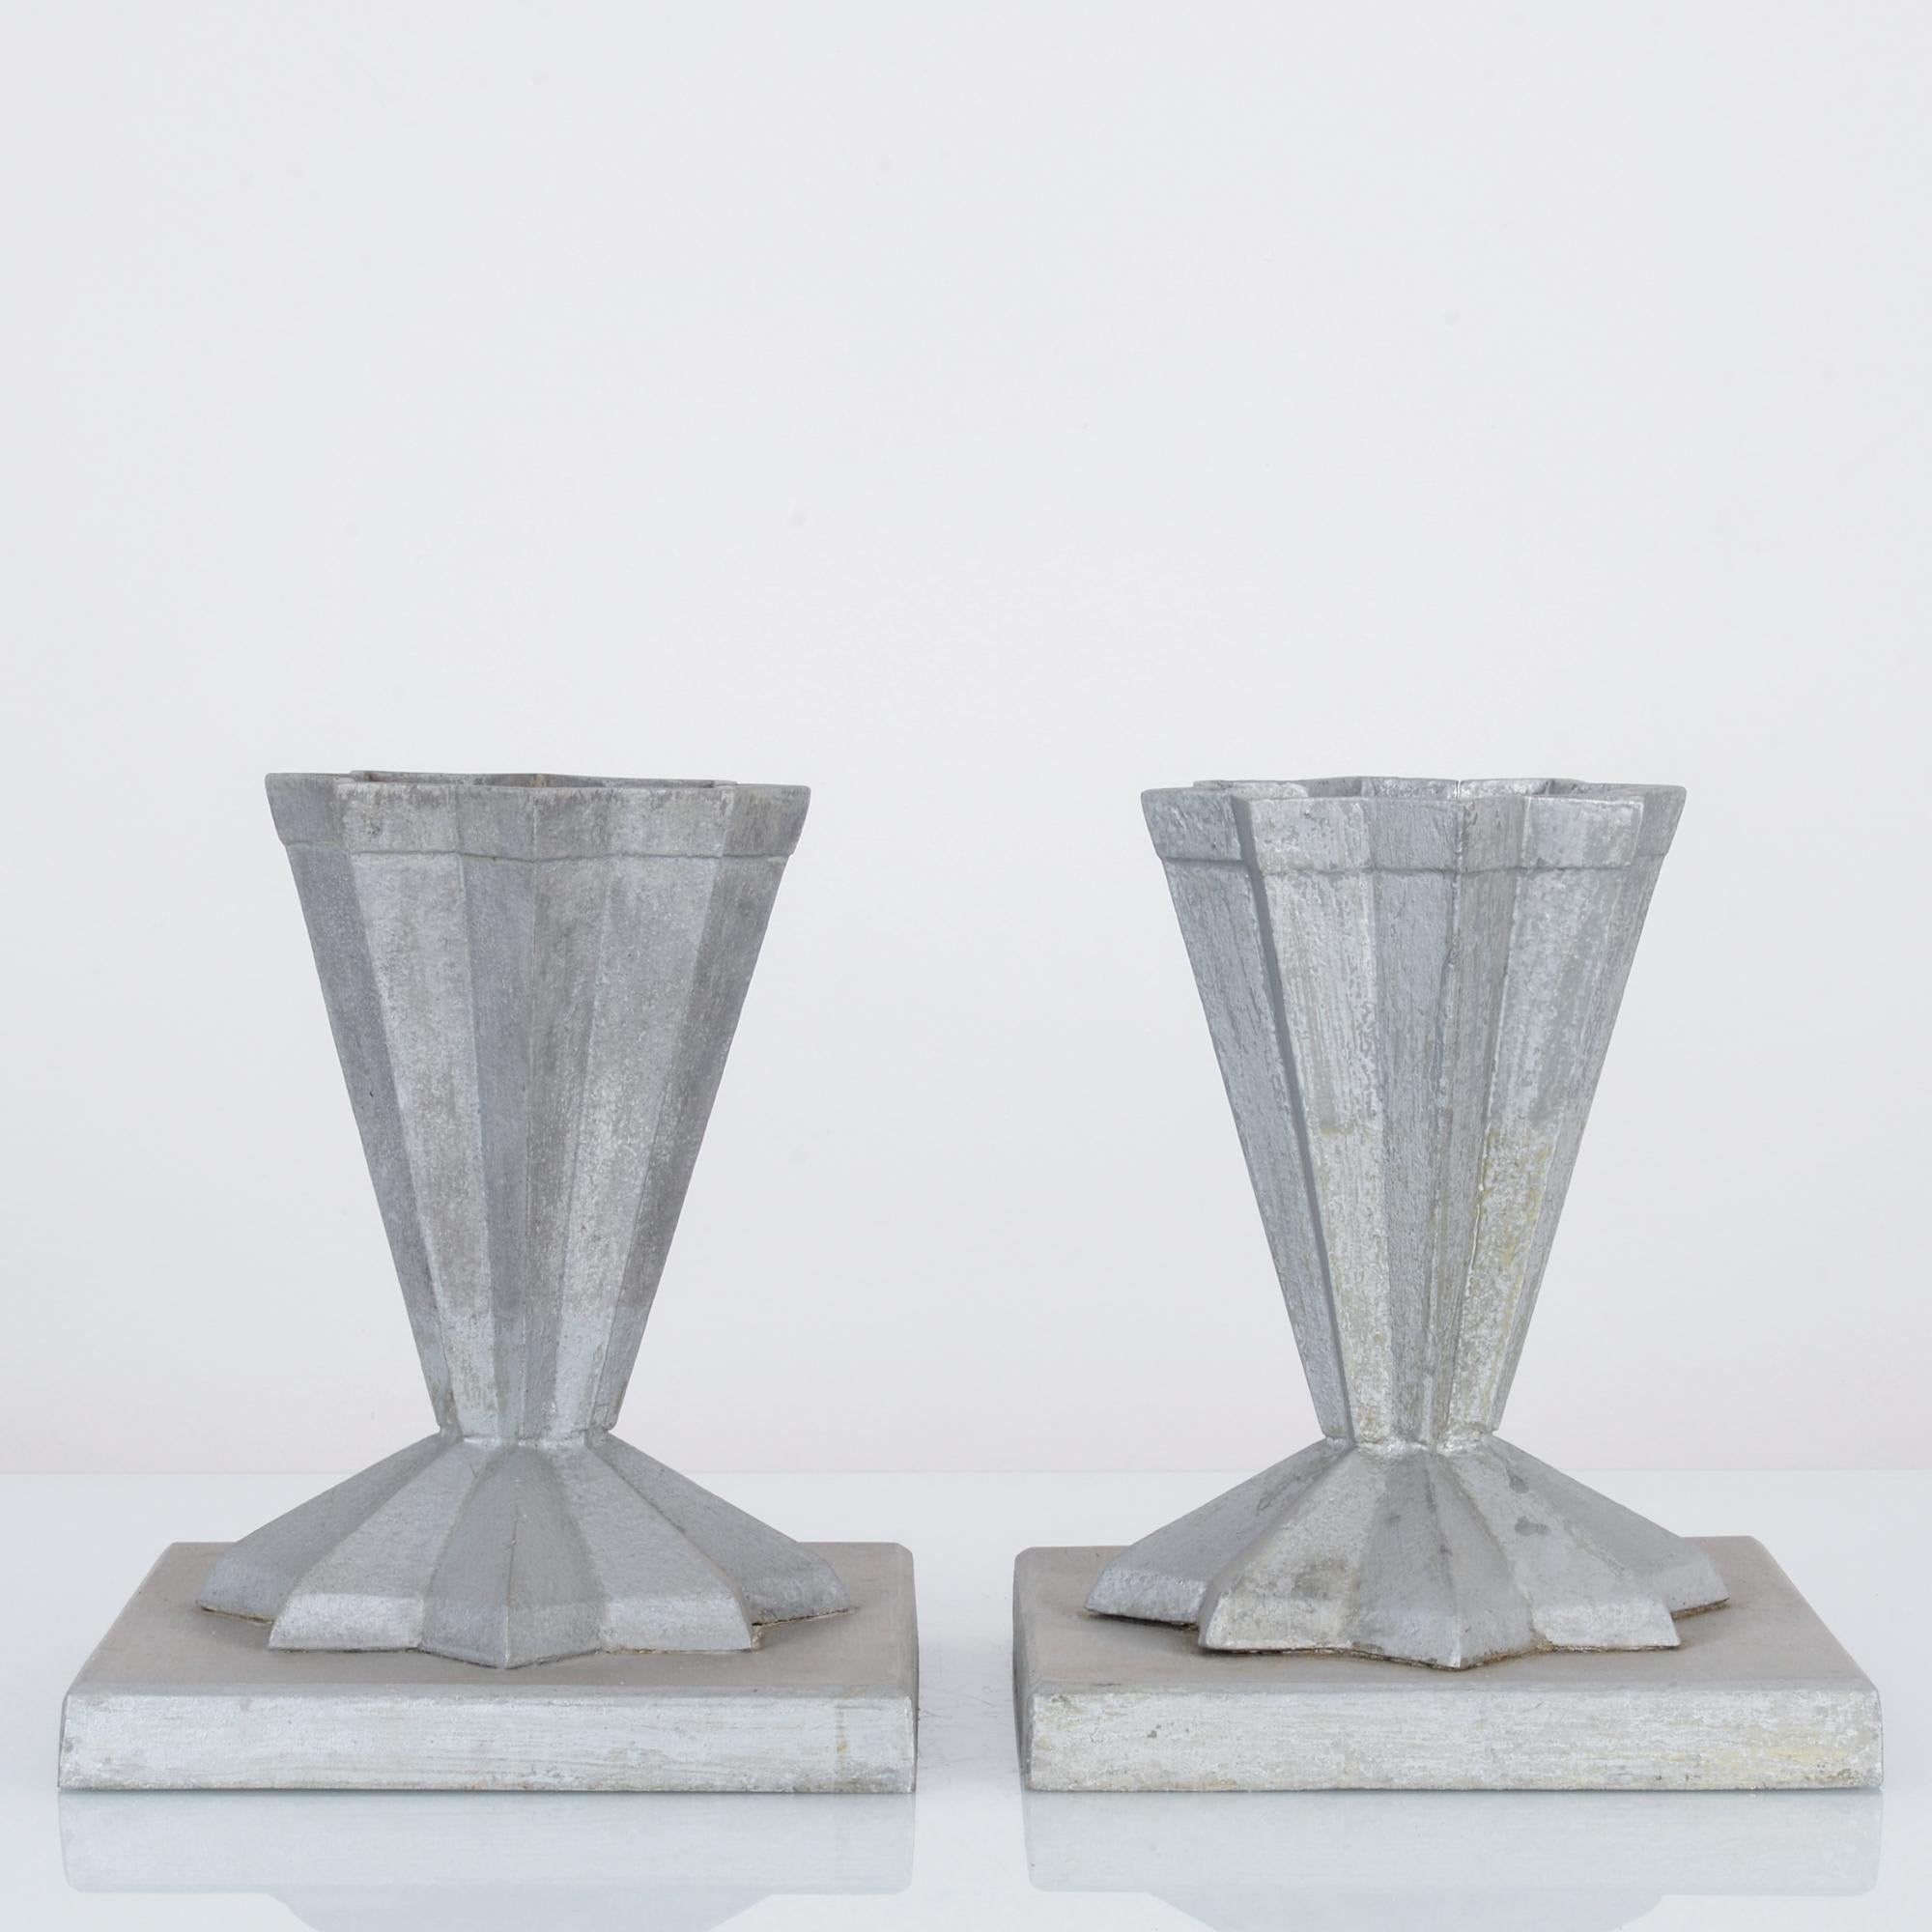 A pair of aluminum planters from France produced circa 1900. Standing on plinths in the shape of eight-point stars, these celestial decorations glitter as raised runes, buffed to a matte shine.